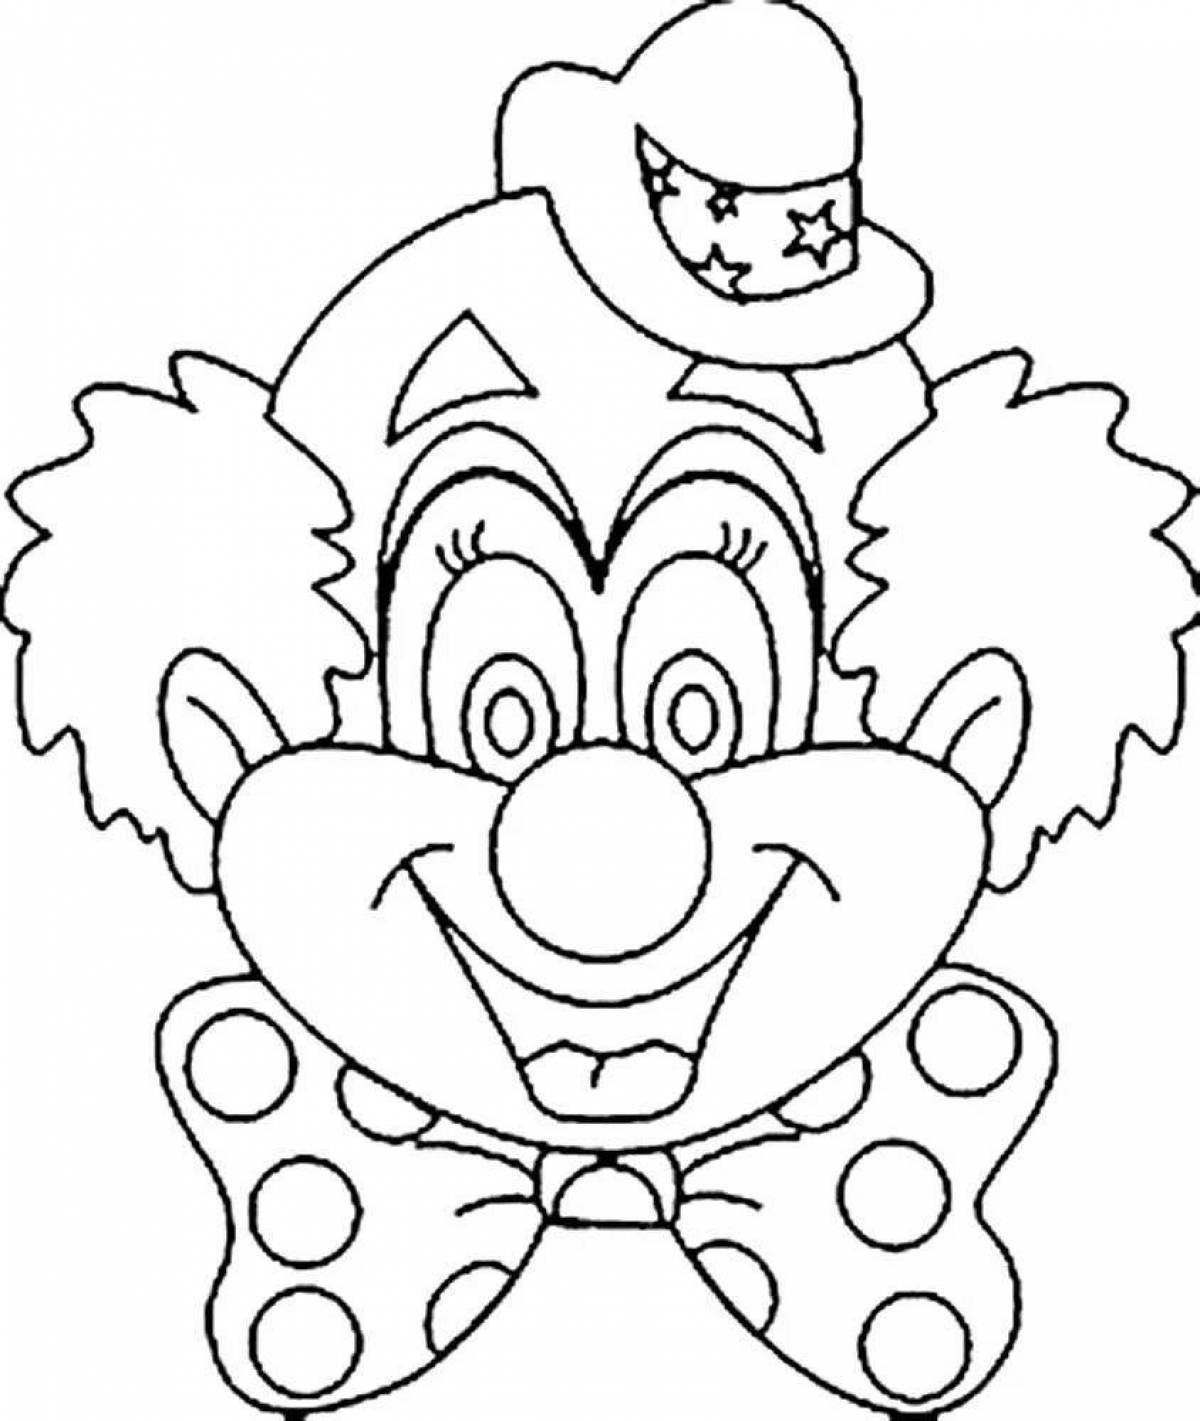 Fun clown face coloring page for kids